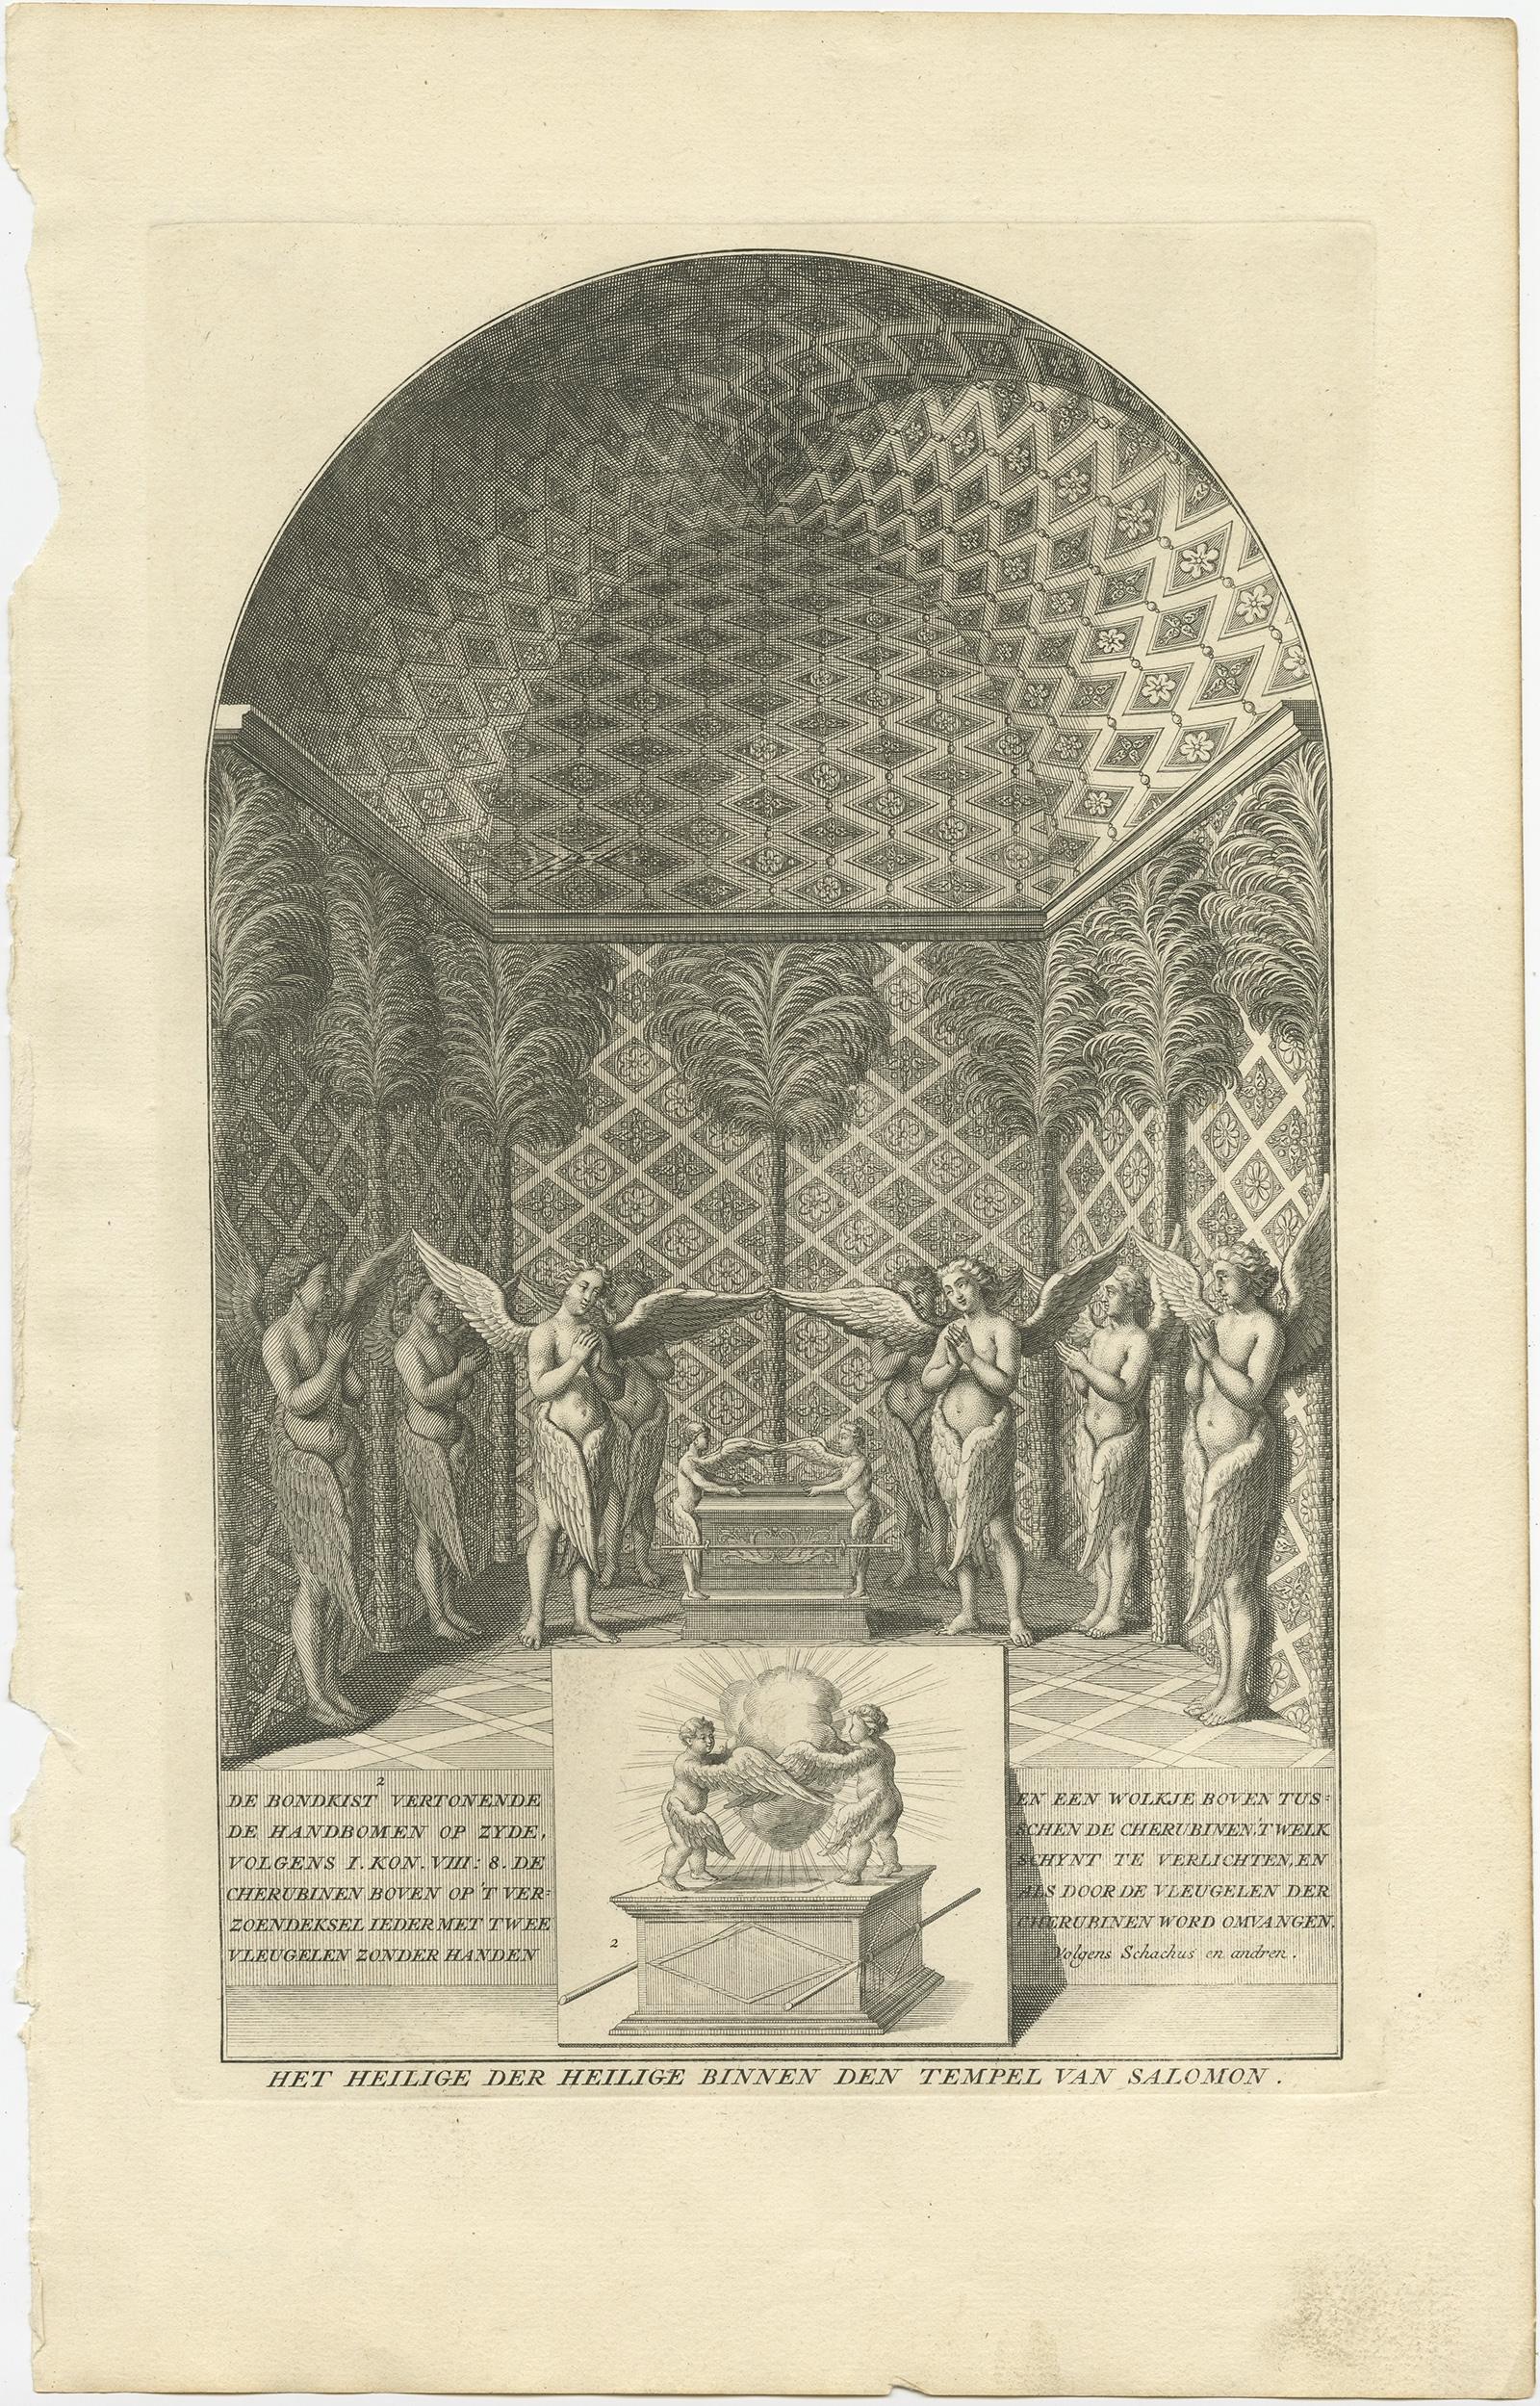 Antique religion print titled 'Het Heilige der Heilige binnen den Tempel van Salomon'. 

This print depicts Solomon's Temple, the Holy of Holies, showing the Ark of the Covenant. Surrounded by angels. Source unknown, to be determined.

Artists